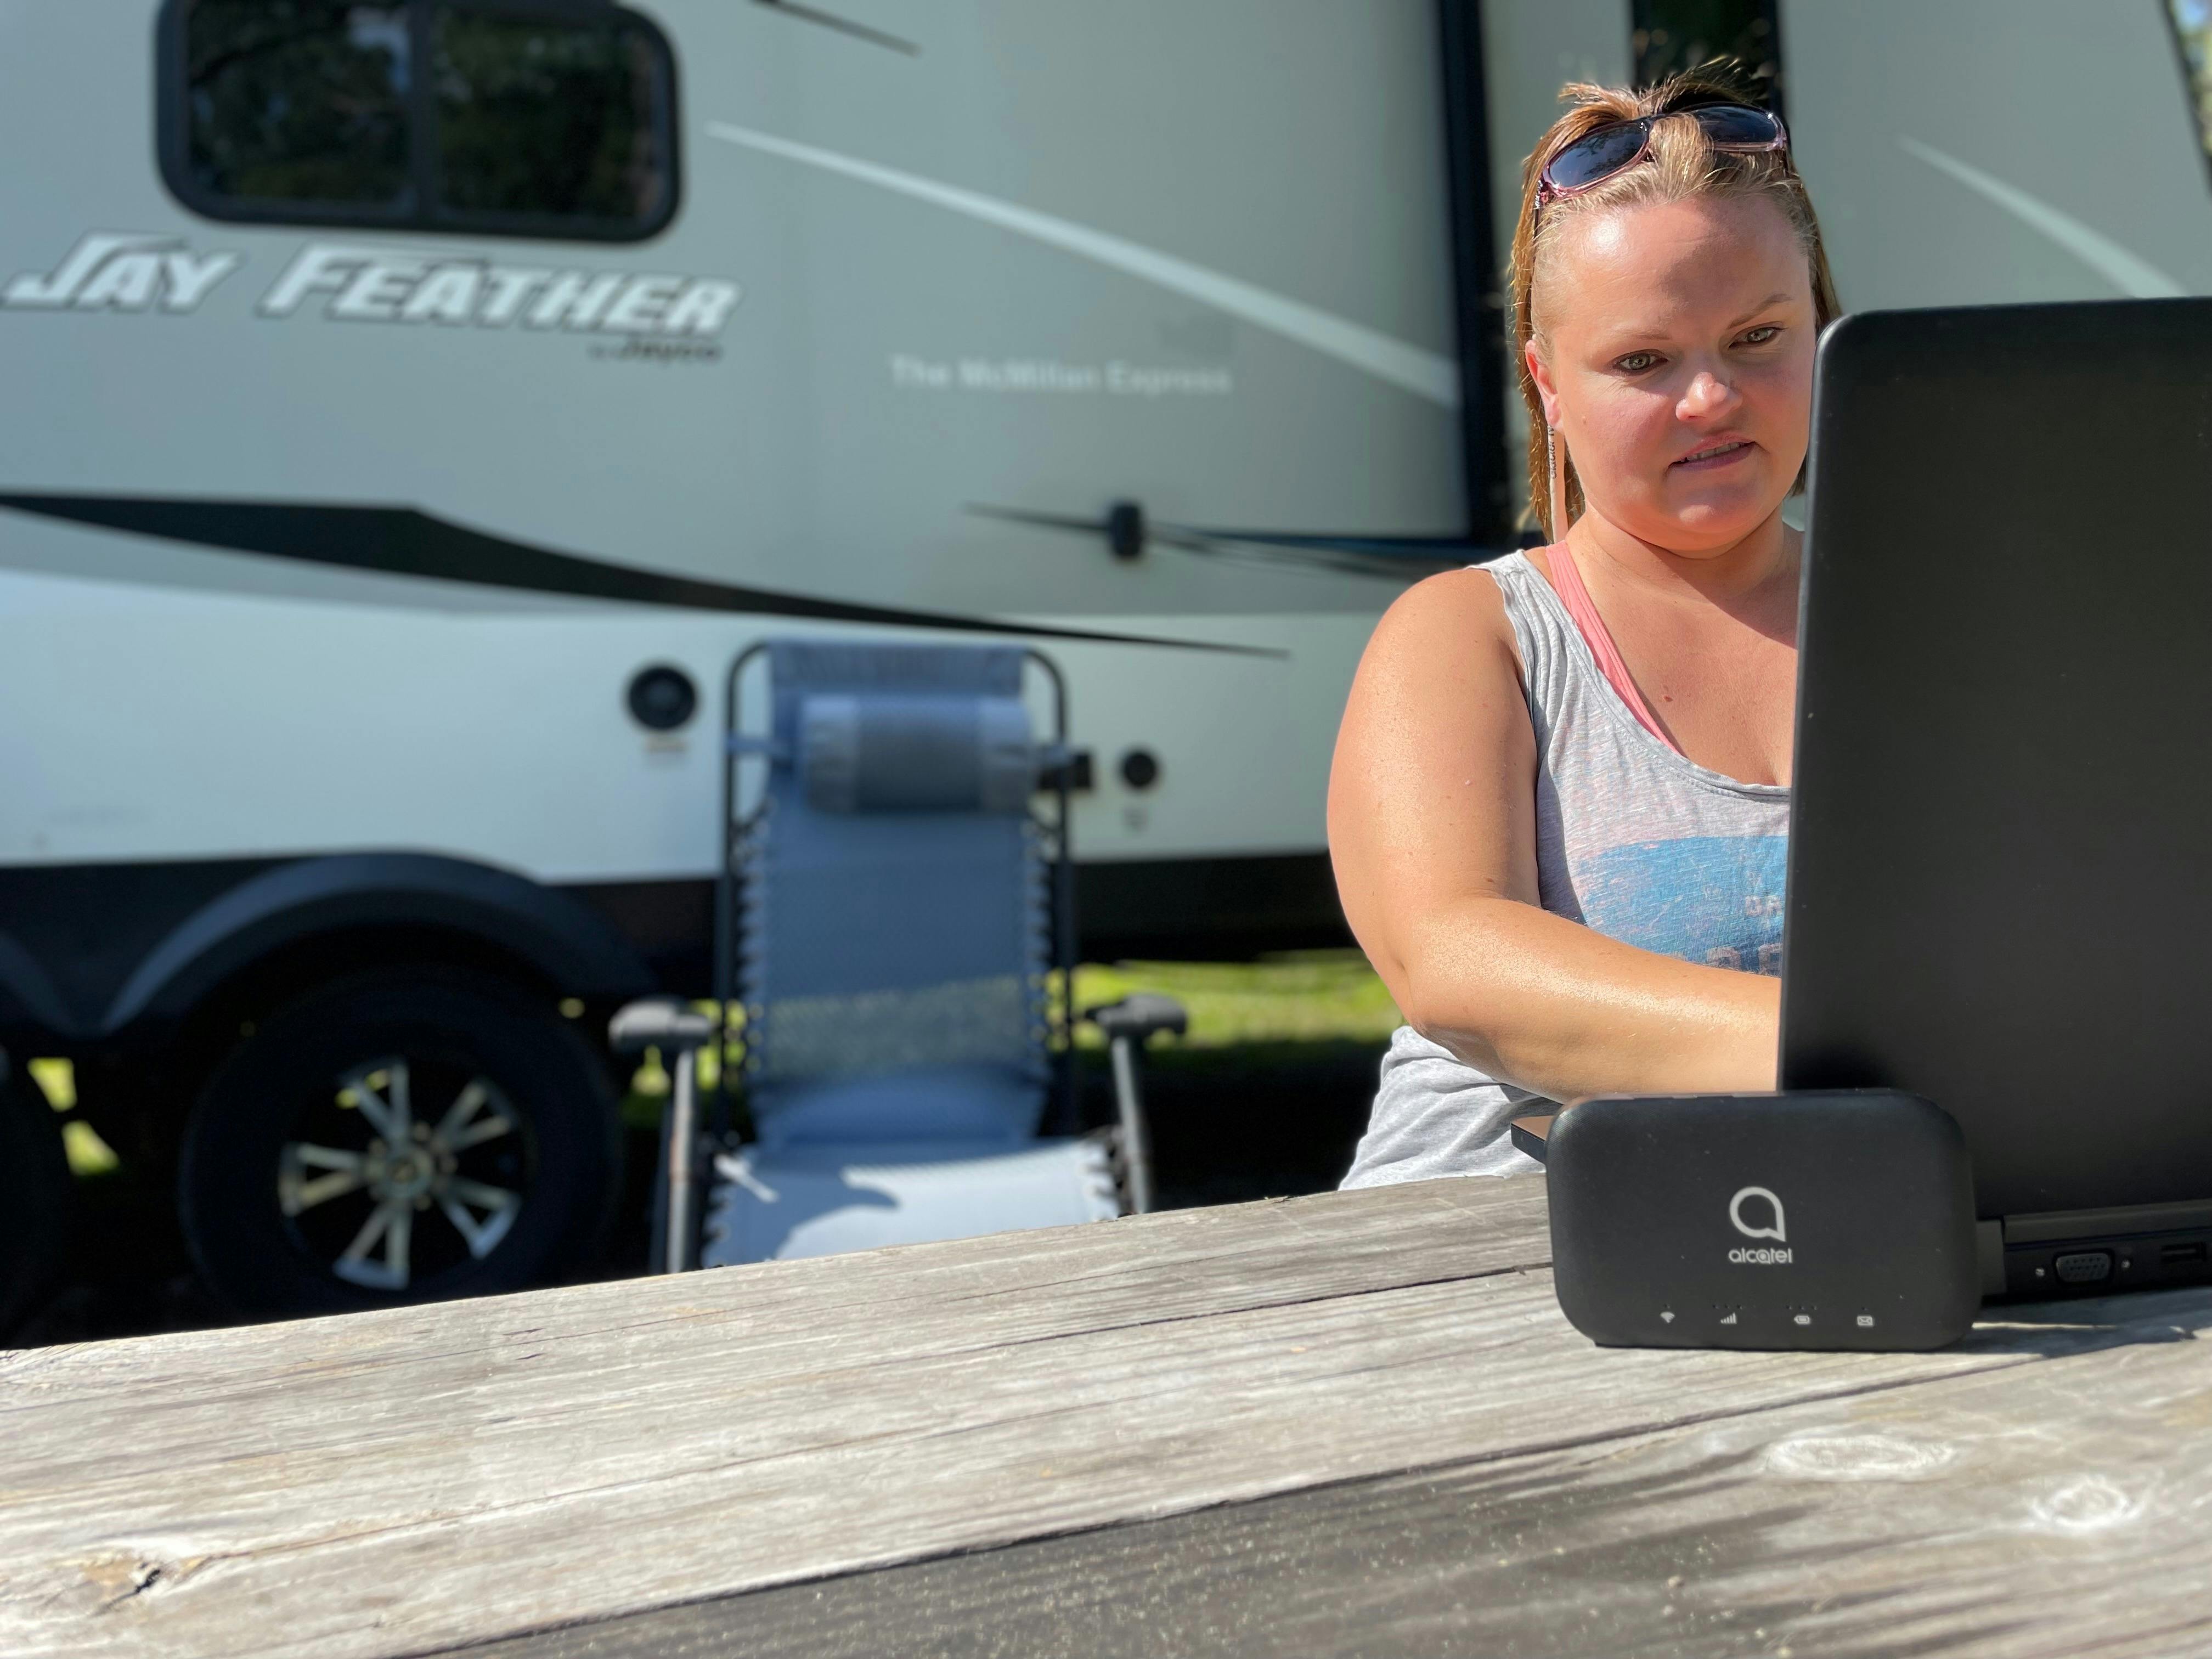 Christina McMillan using a cricket hot spot while on a laptop outside of her RV